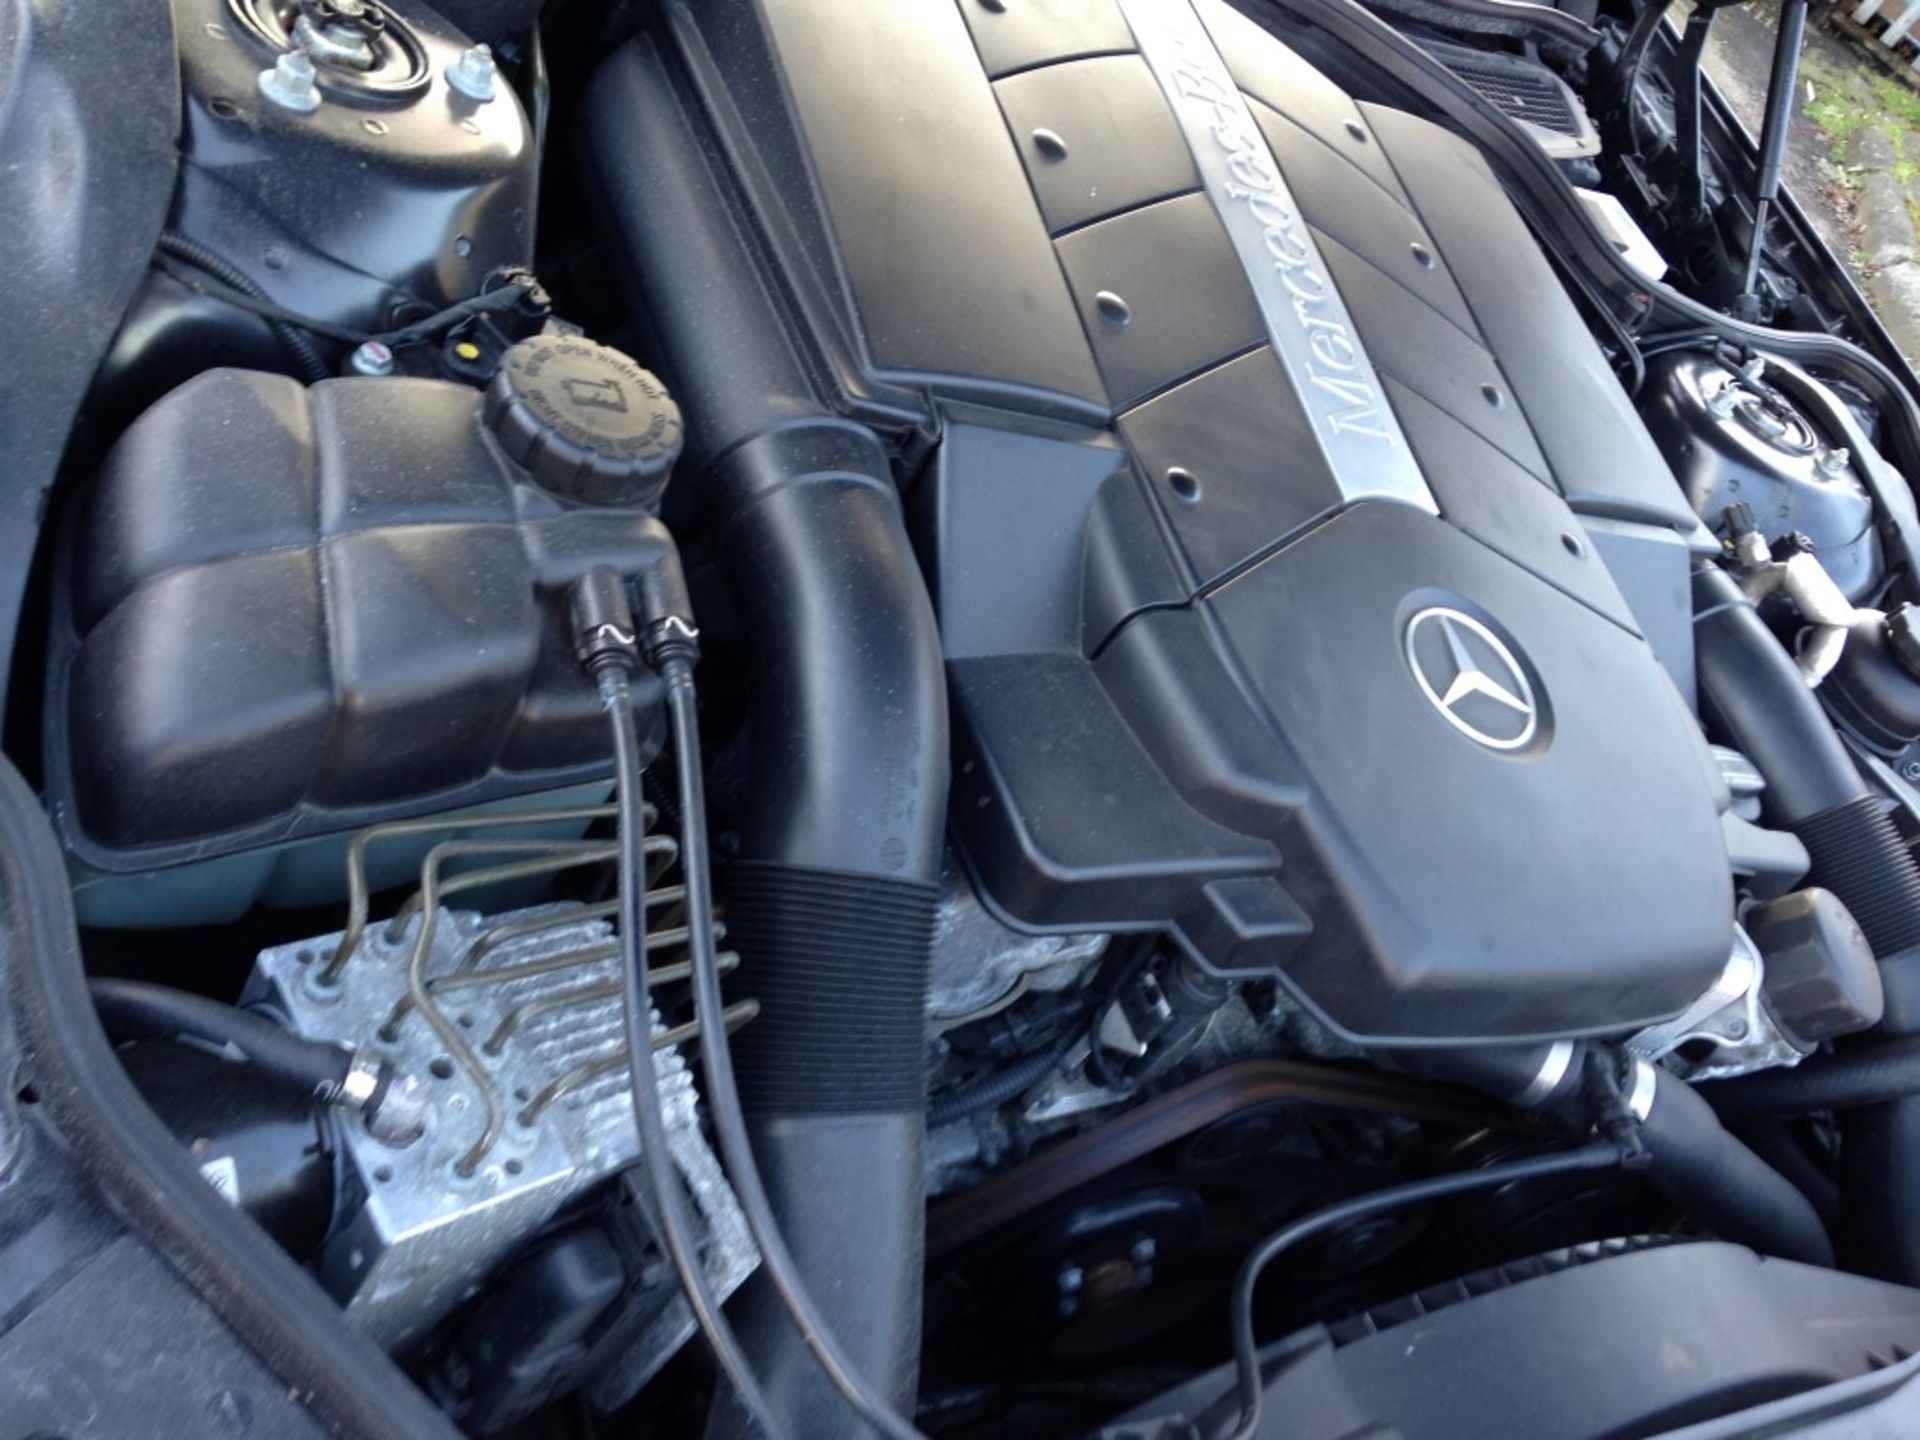 1 x Mercedes SL500 Automatic 5.0 Convertible - Petrol - Year 2002 - 94,500 Miles - Long MOT Expiry - Image 40 of 48